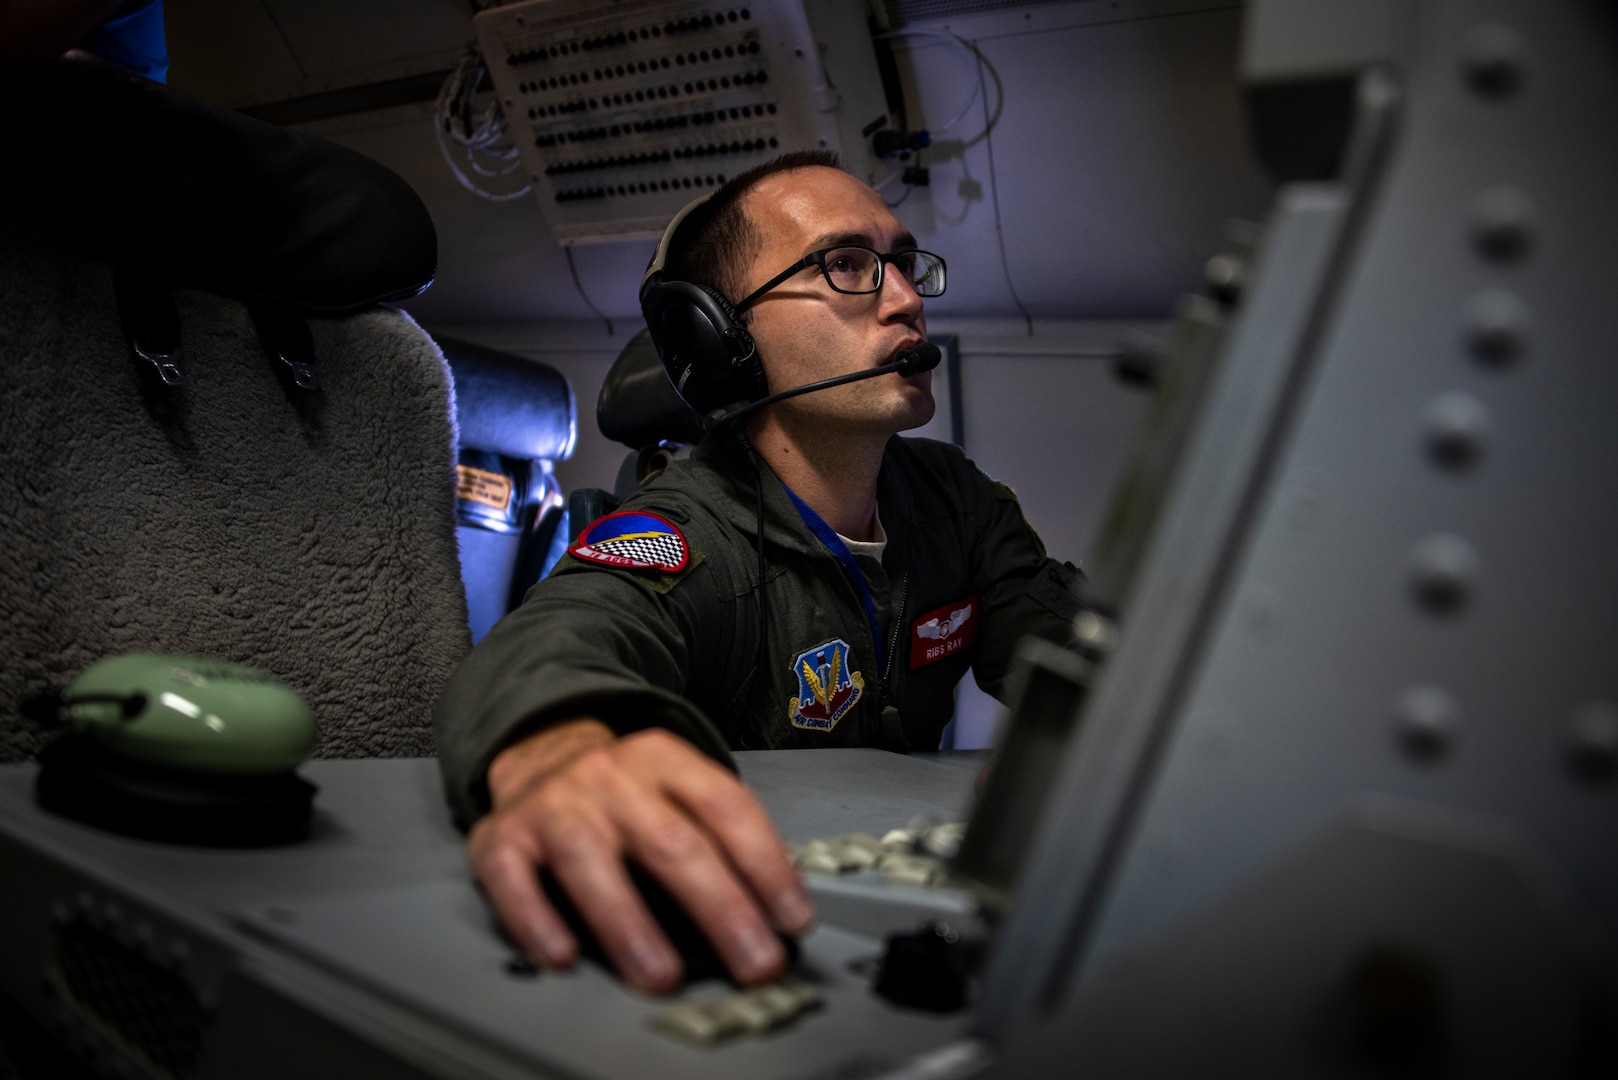 Air battle manager with 16th Airborne Command and Control Squadron monitors radar system on E-8 Joint STARS aircraft flying off coast of Florida, July 14, 2018 (U.S. Air Force/Marianique Santos)